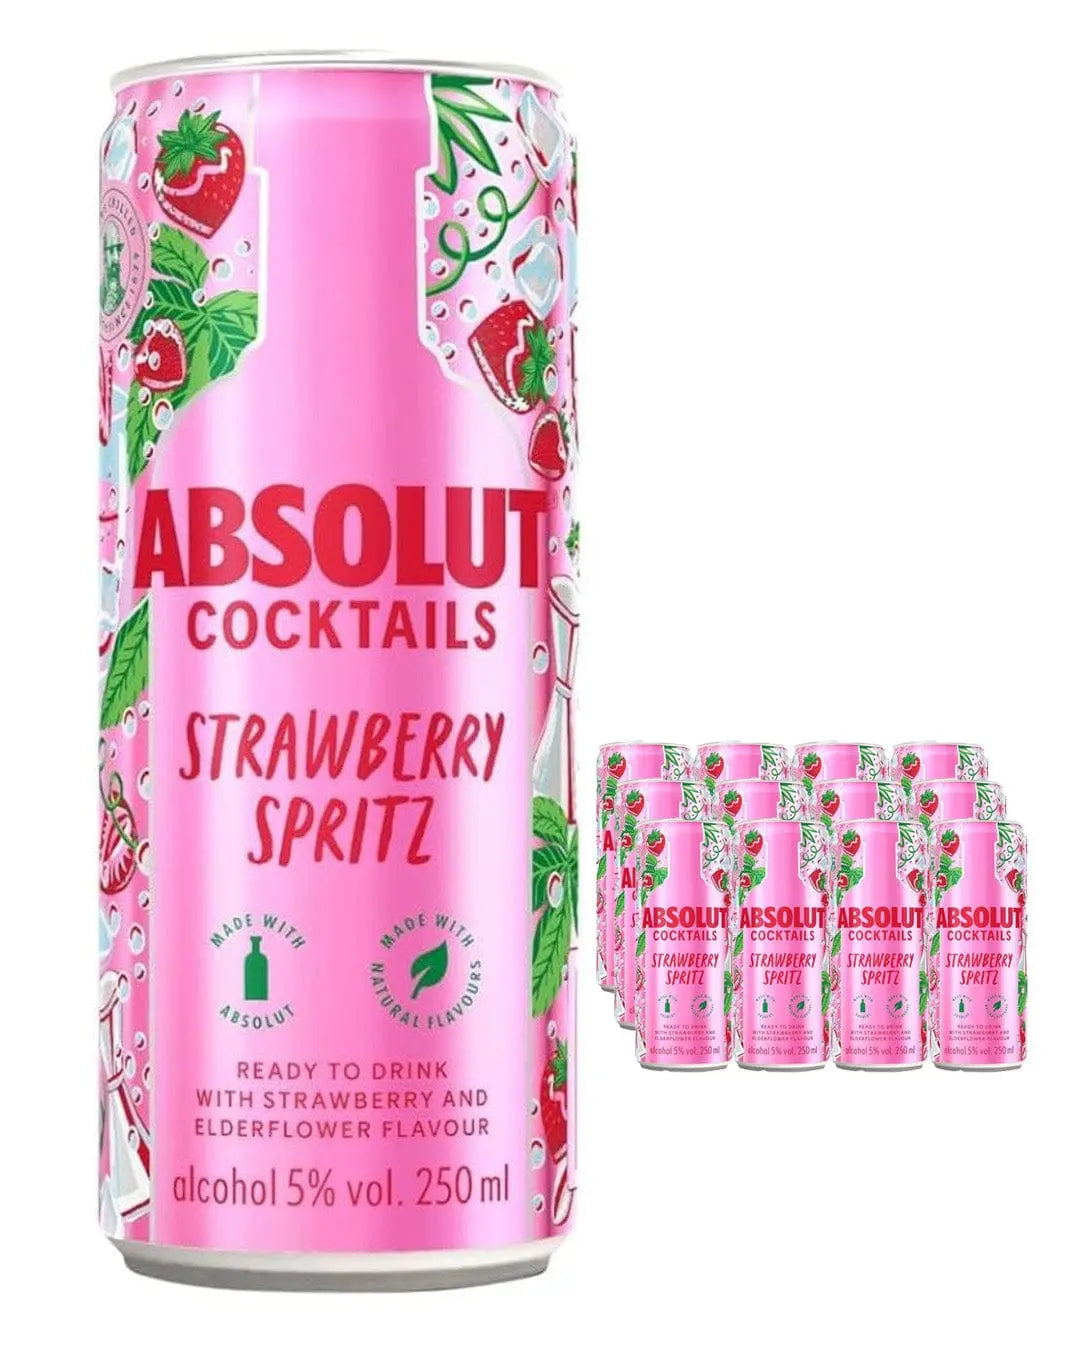 Absolut Strawberry Spritz Premixed Can Multipack, 12 x 250 ml Ready Made Cocktails